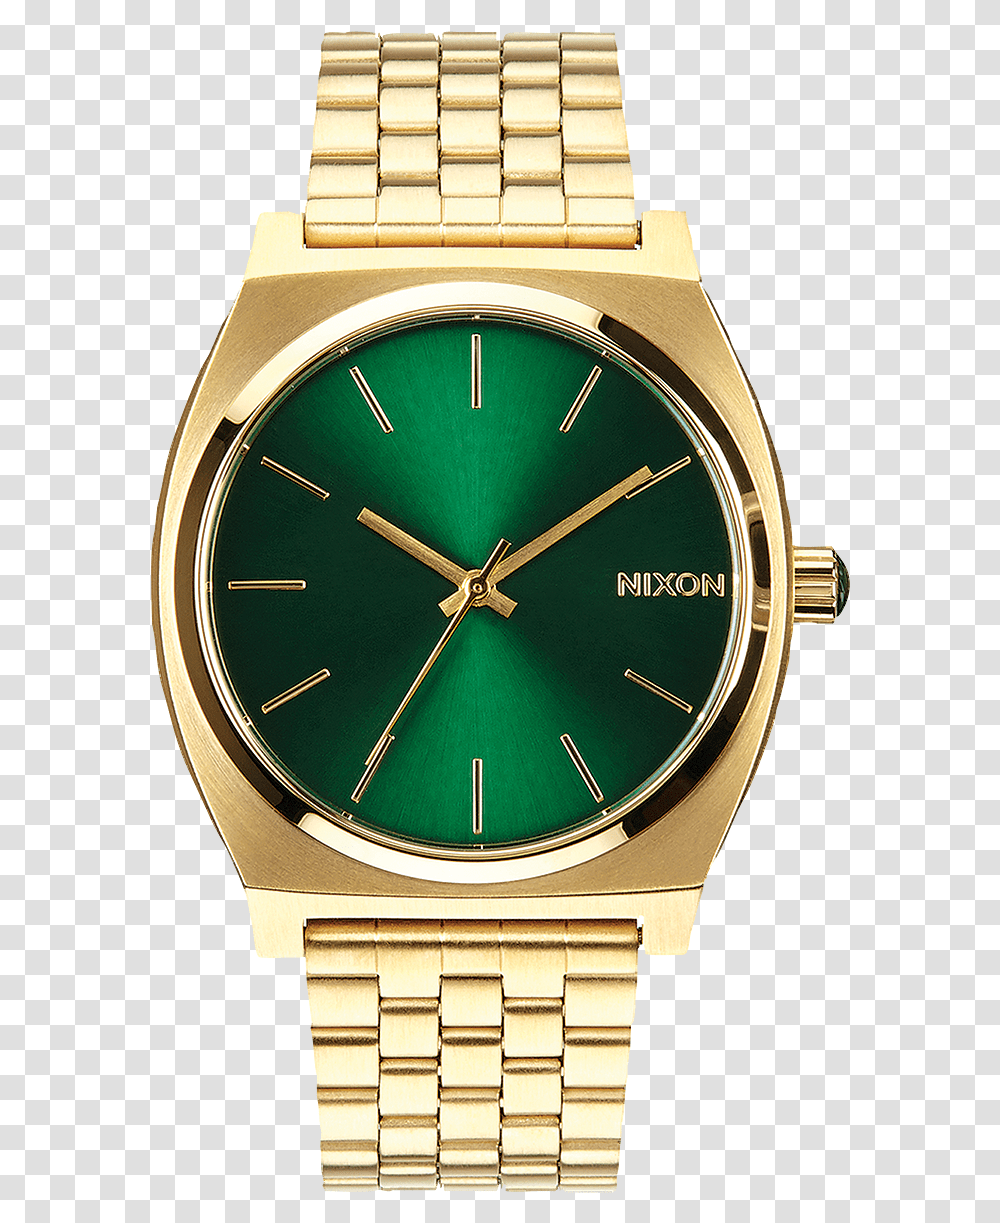 Nixon Gold And Green Watch, Wristwatch, Clock Tower, Architecture, Building Transparent Png